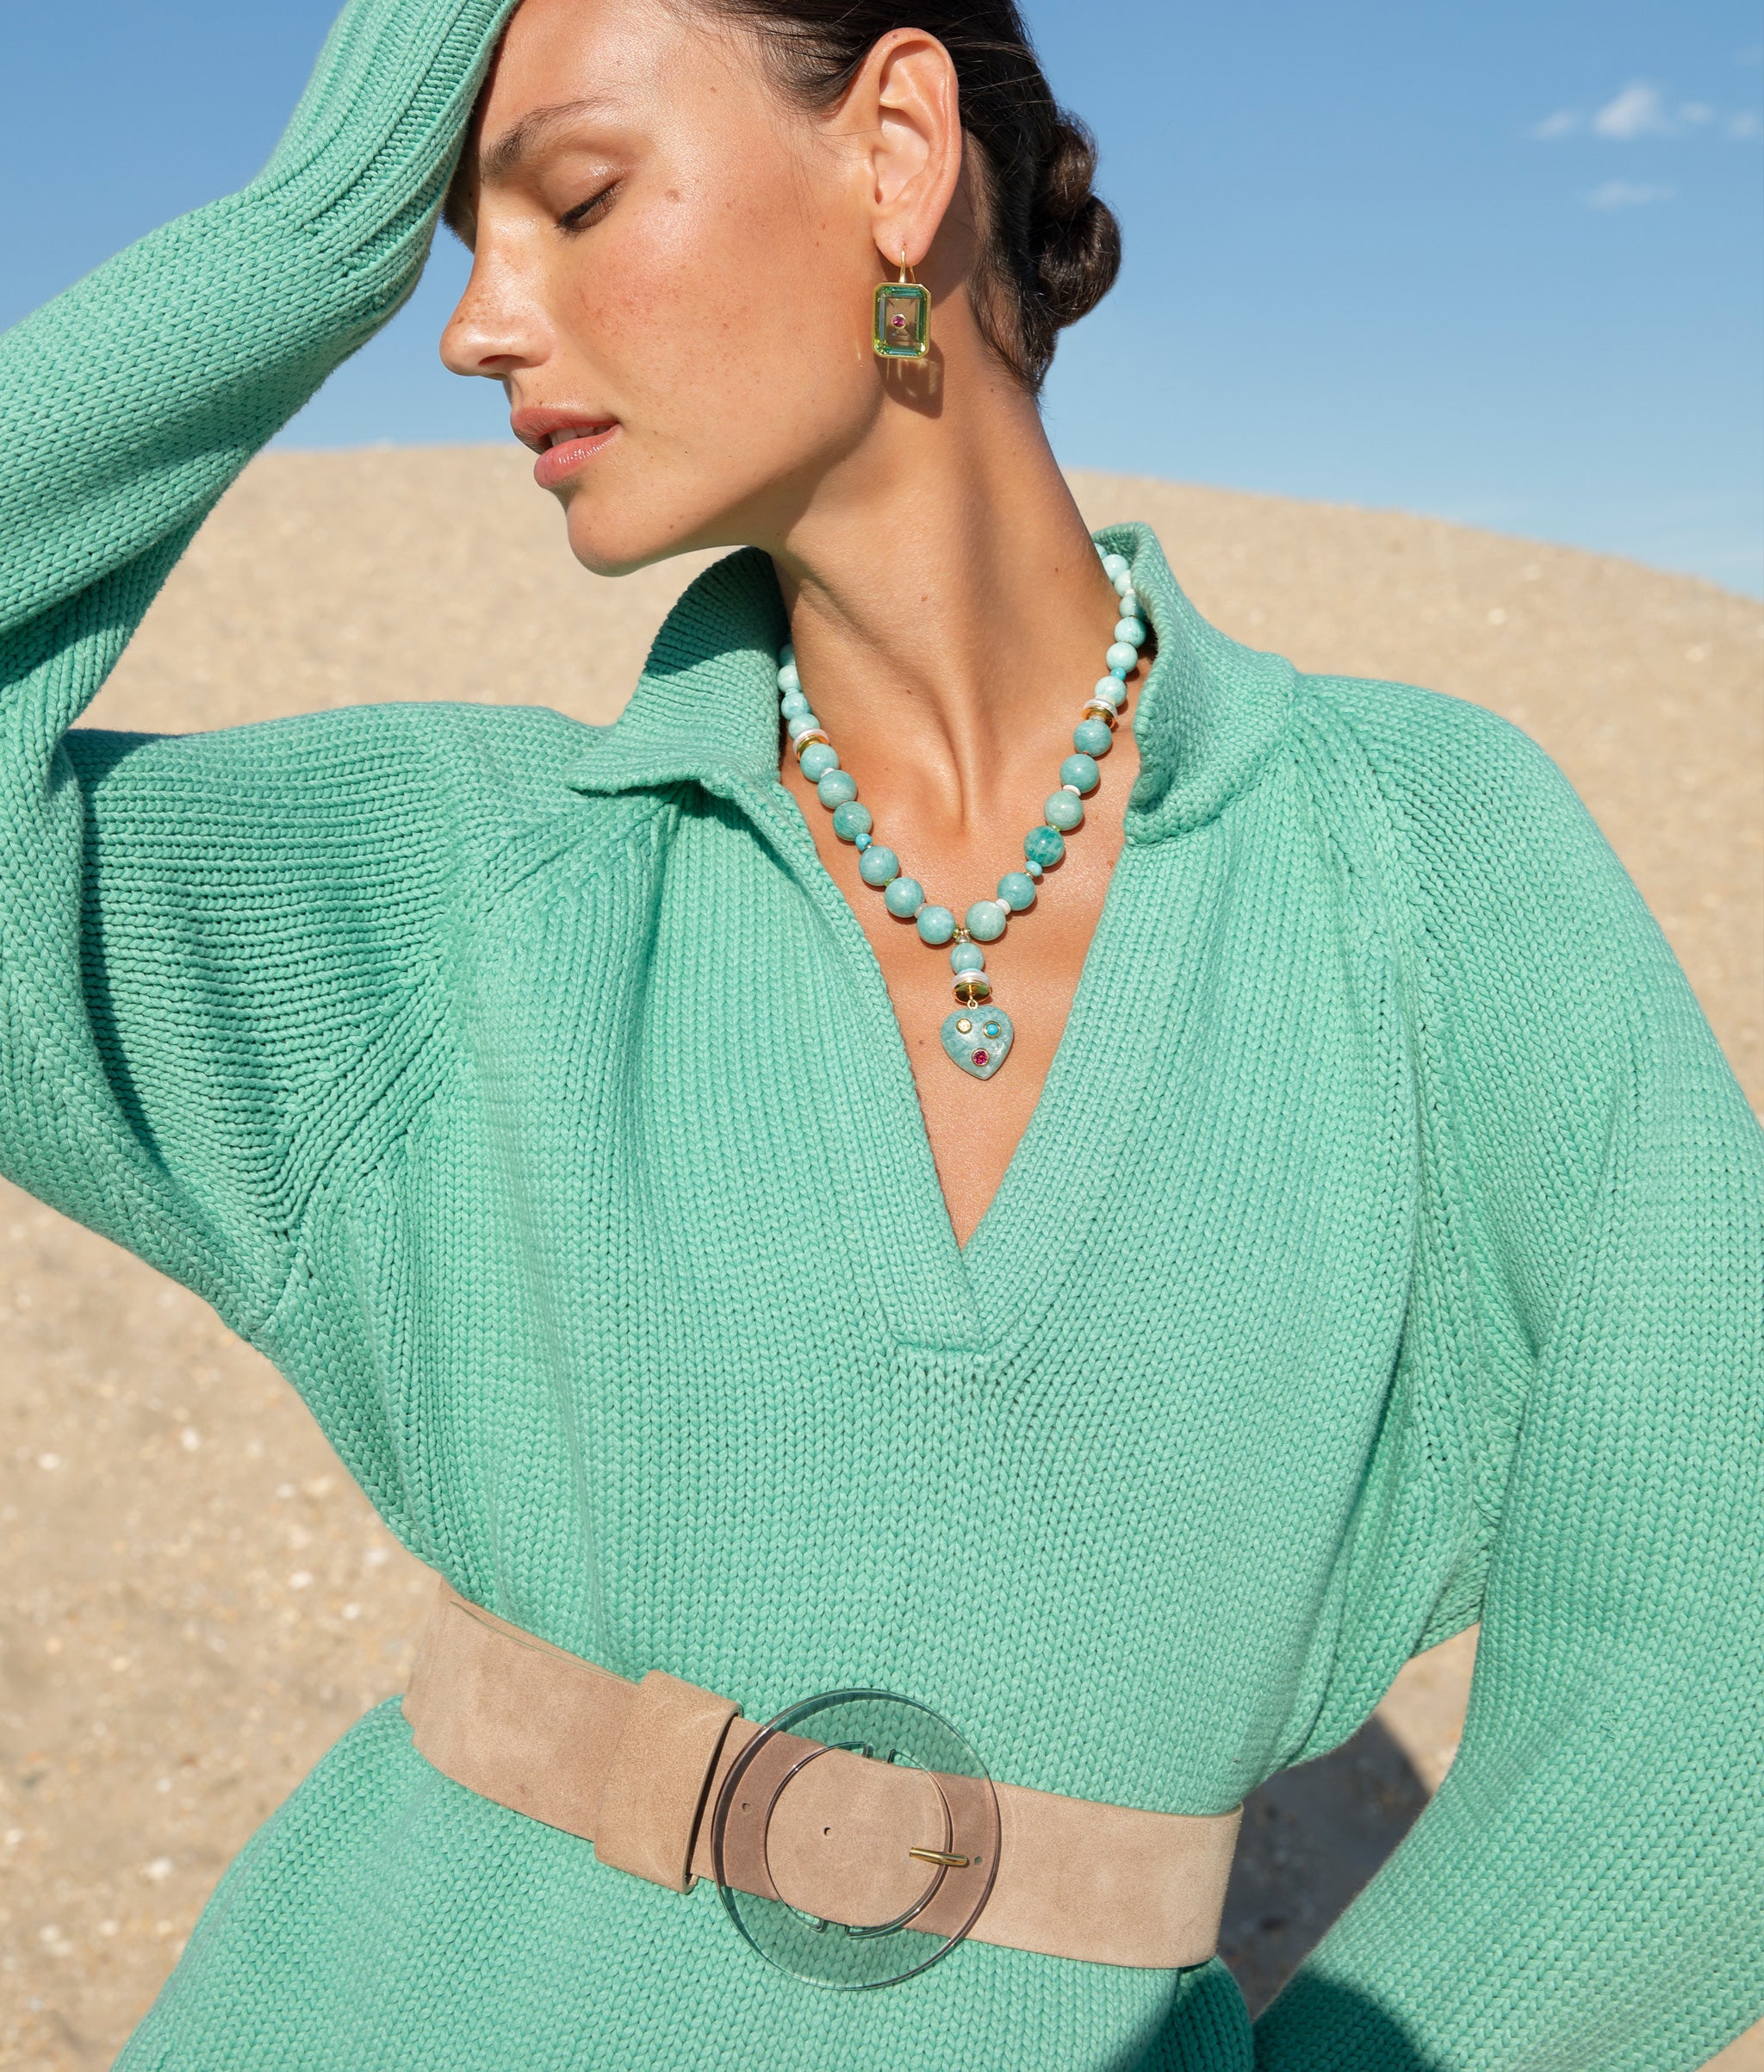 Model at the beach wearing the Louise Belt in Light Taupe Suede worn with Tile Earrings in Aqua and Rincon Heart Necklace.